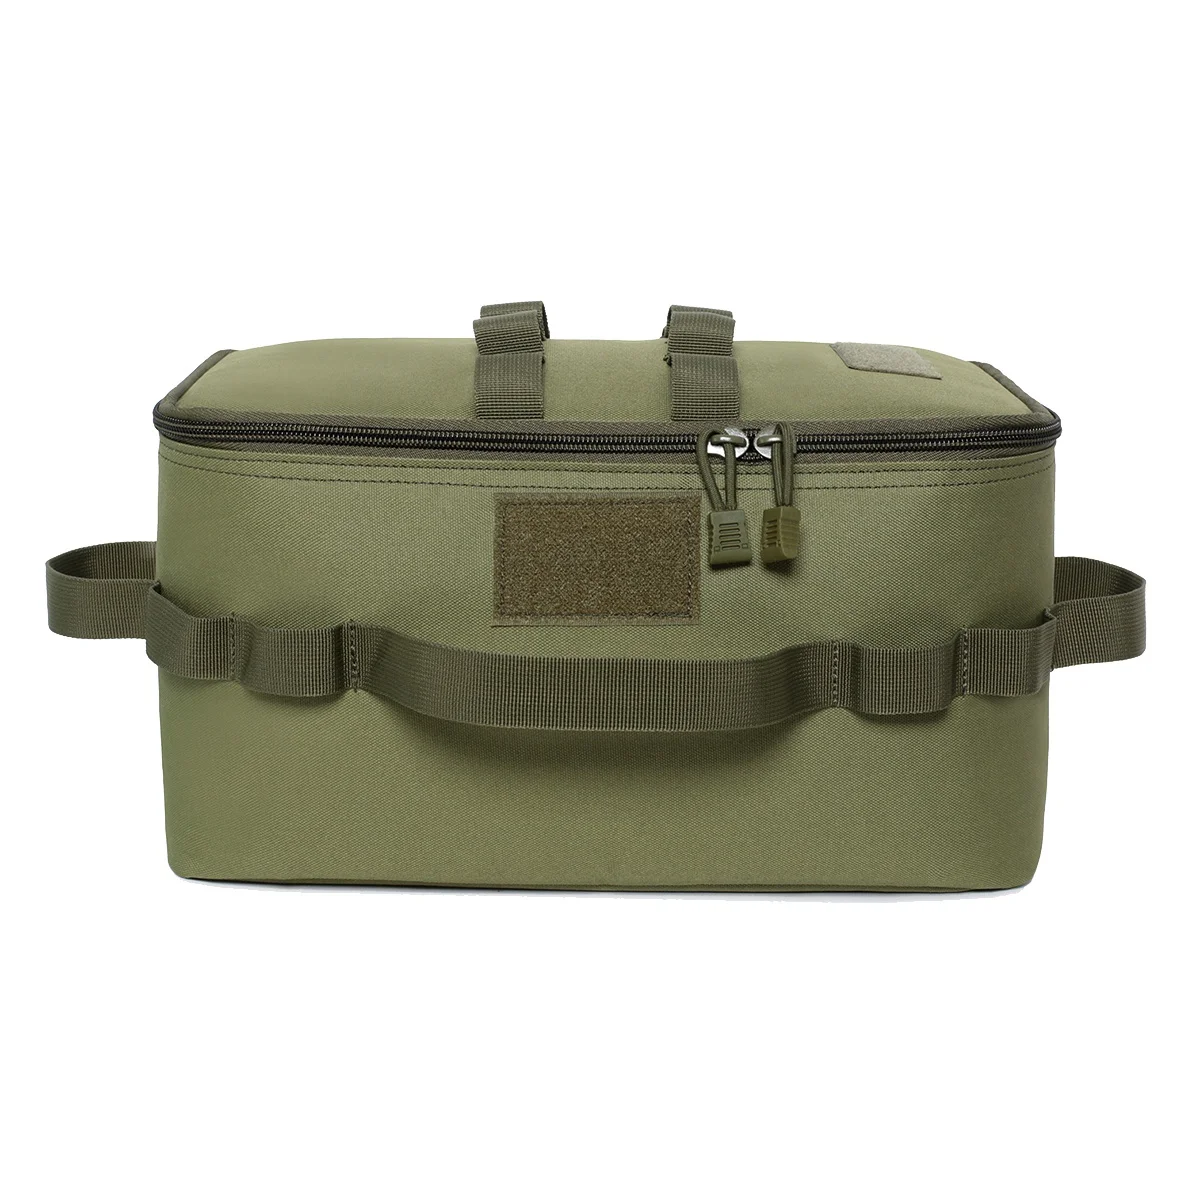 

Outdoor Camping Storage Bag Gas Stove Canister Pot Carry Bag Picnic Bag Cookware Utensils Organizer Green